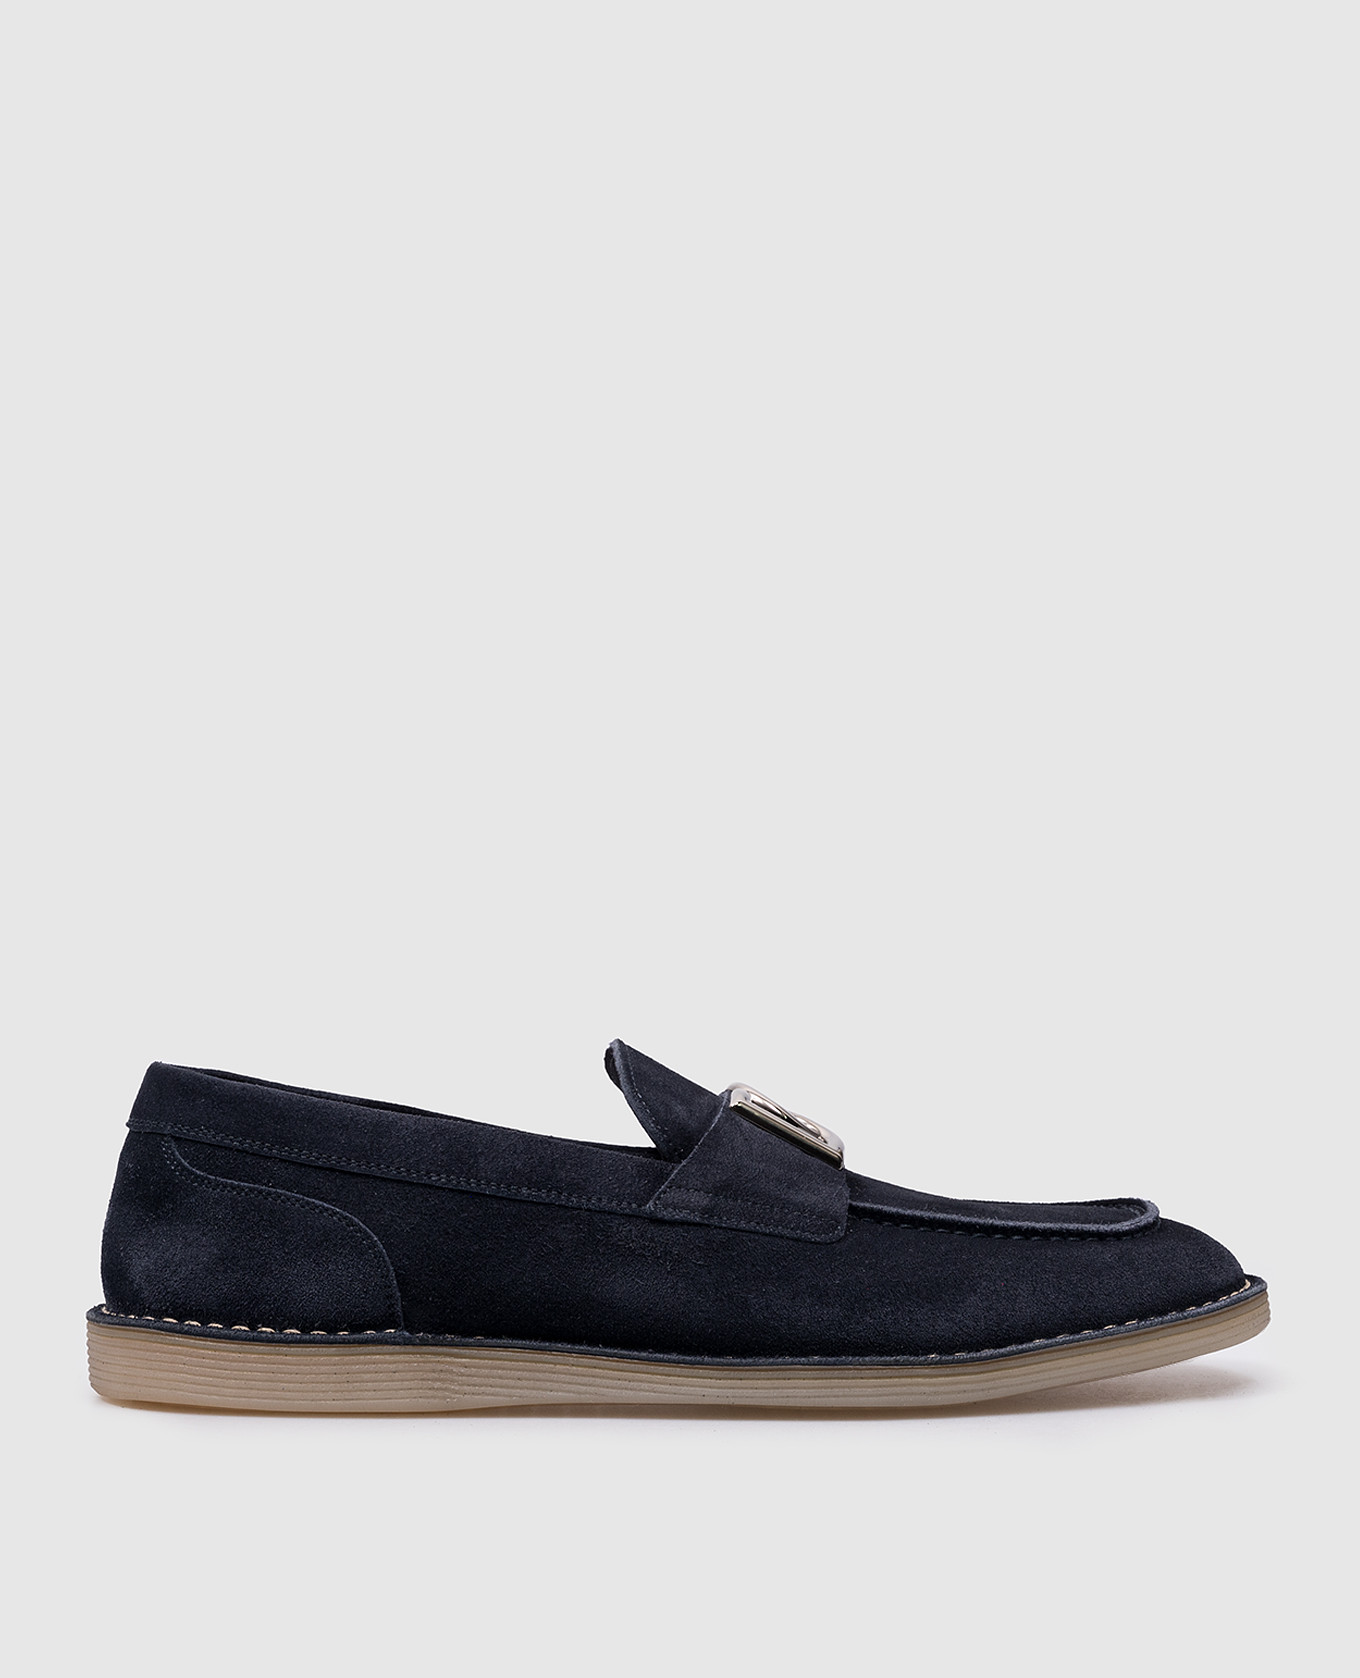 Blue suede loafers with metallic monogram logo